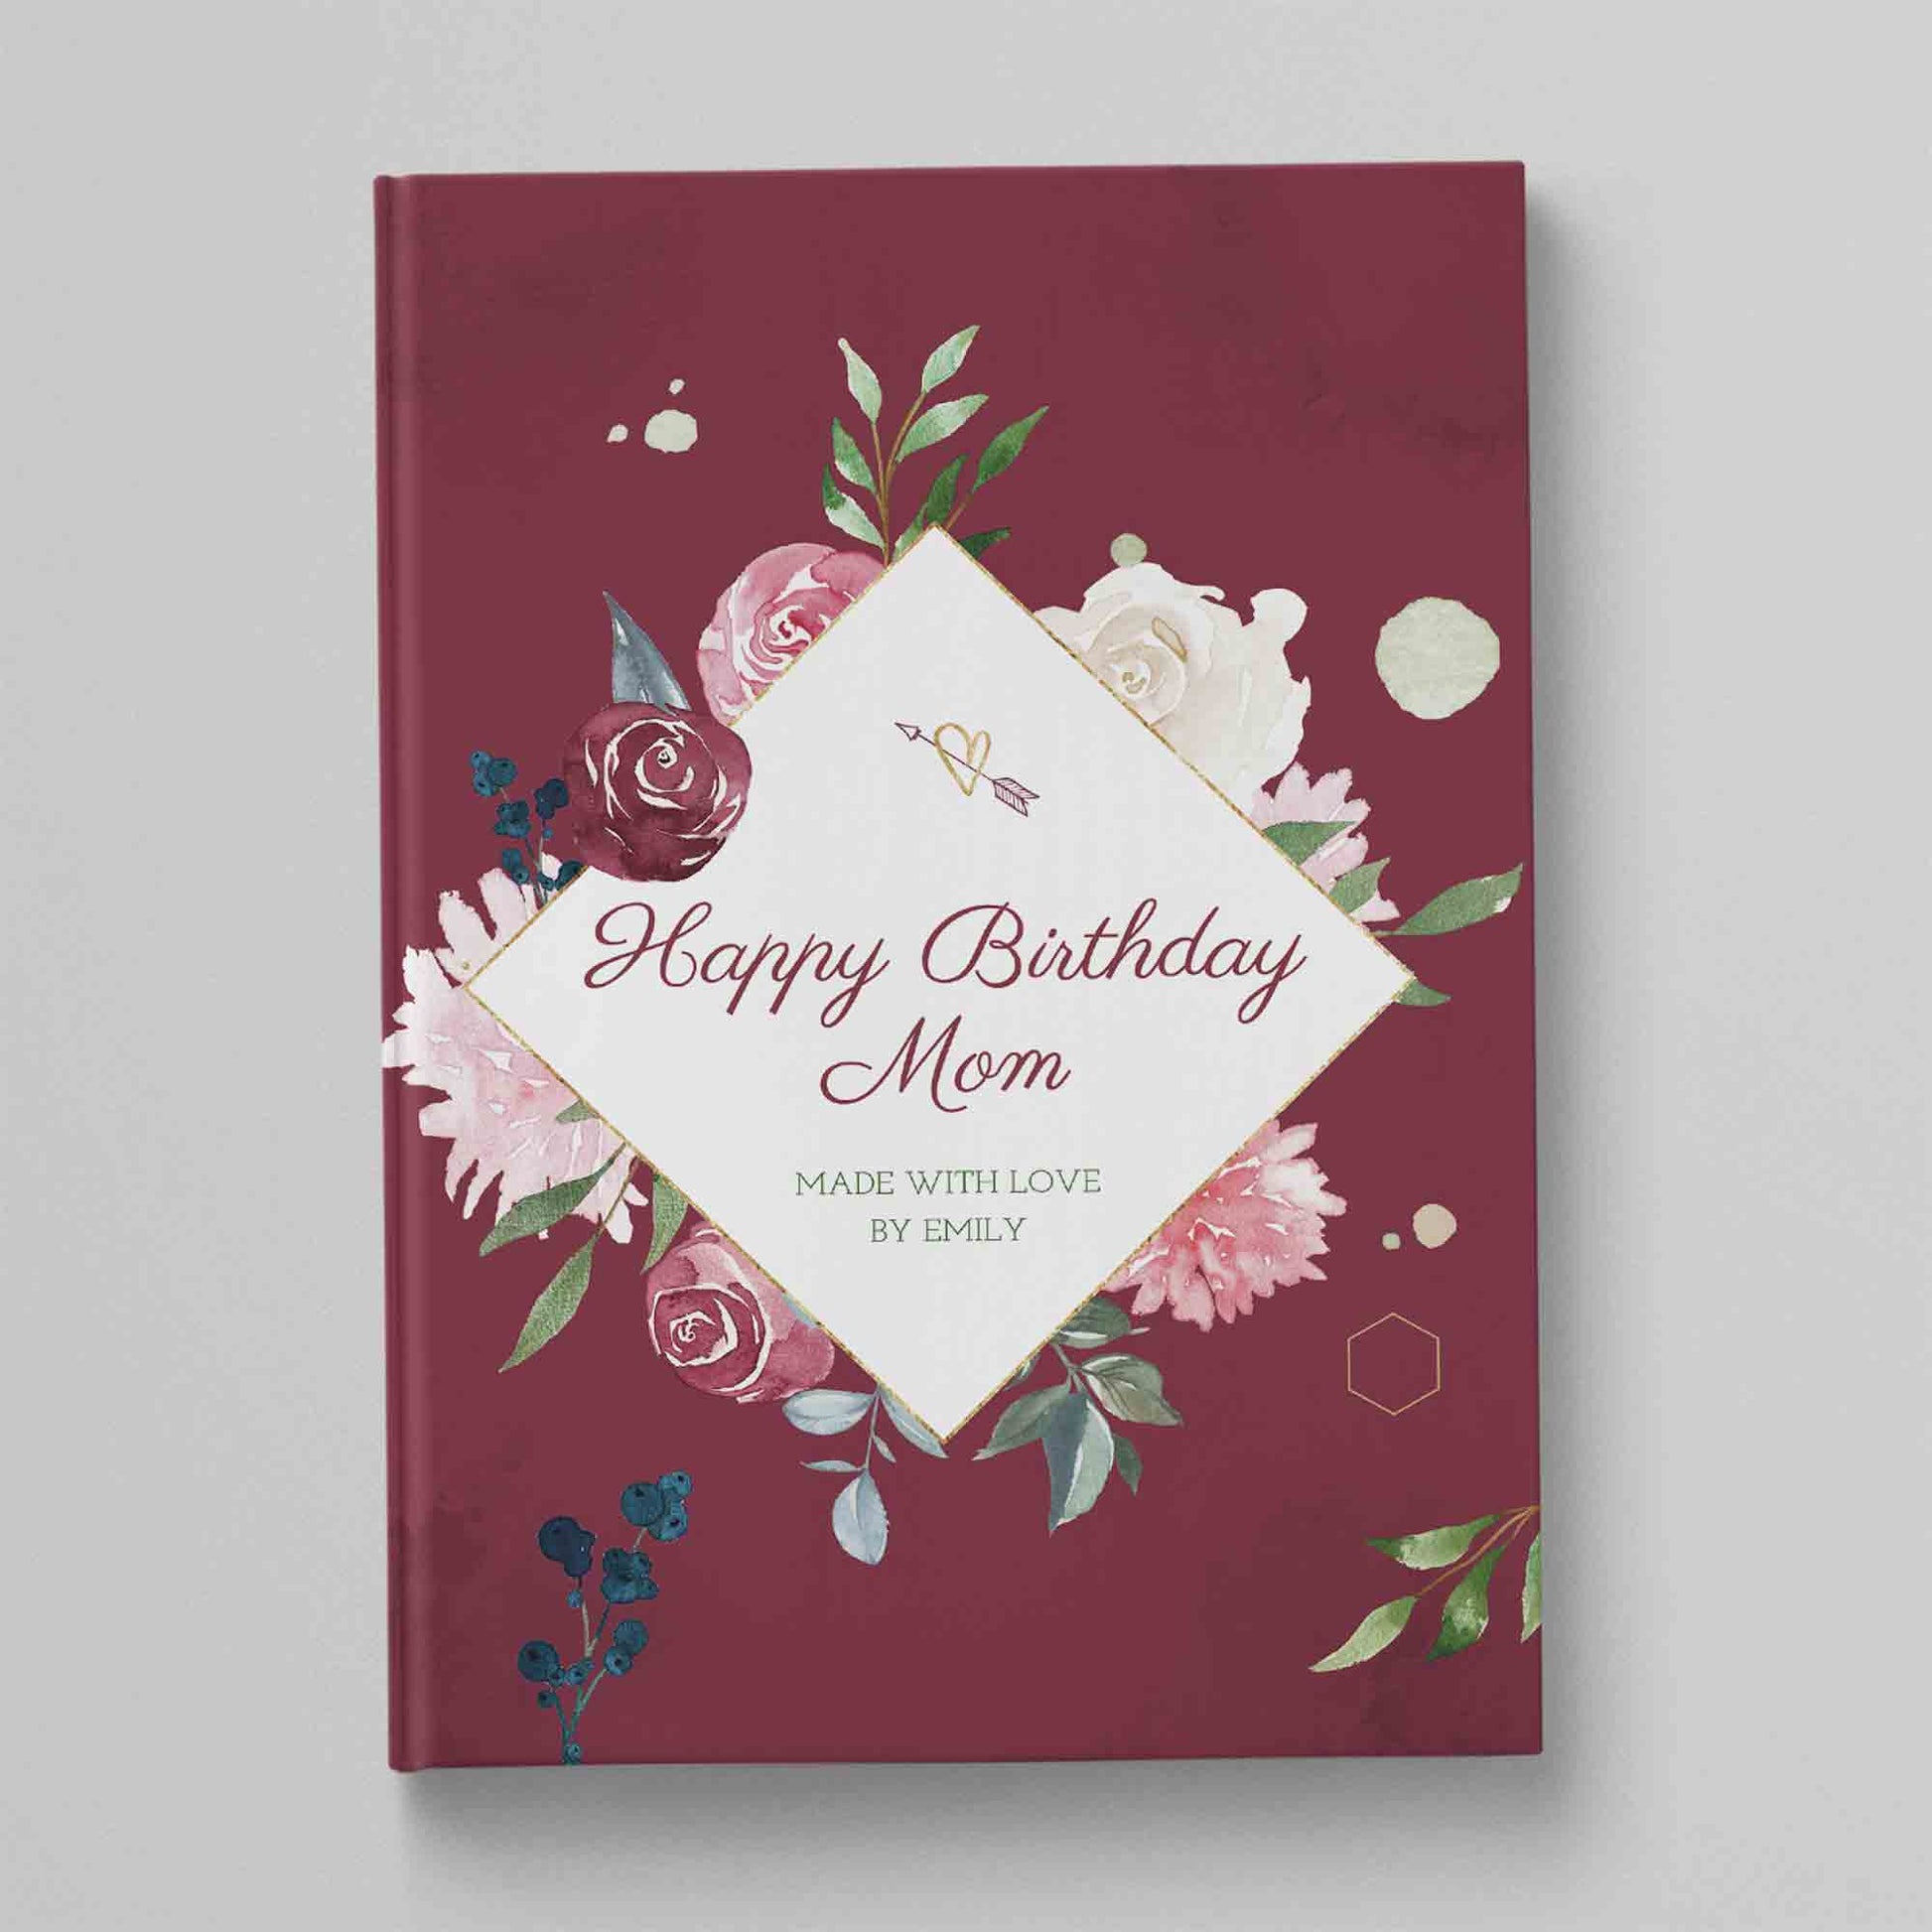 Personalized Book For Mom, Mother Daughter Gift -Luhvee Books - Luhvee Books